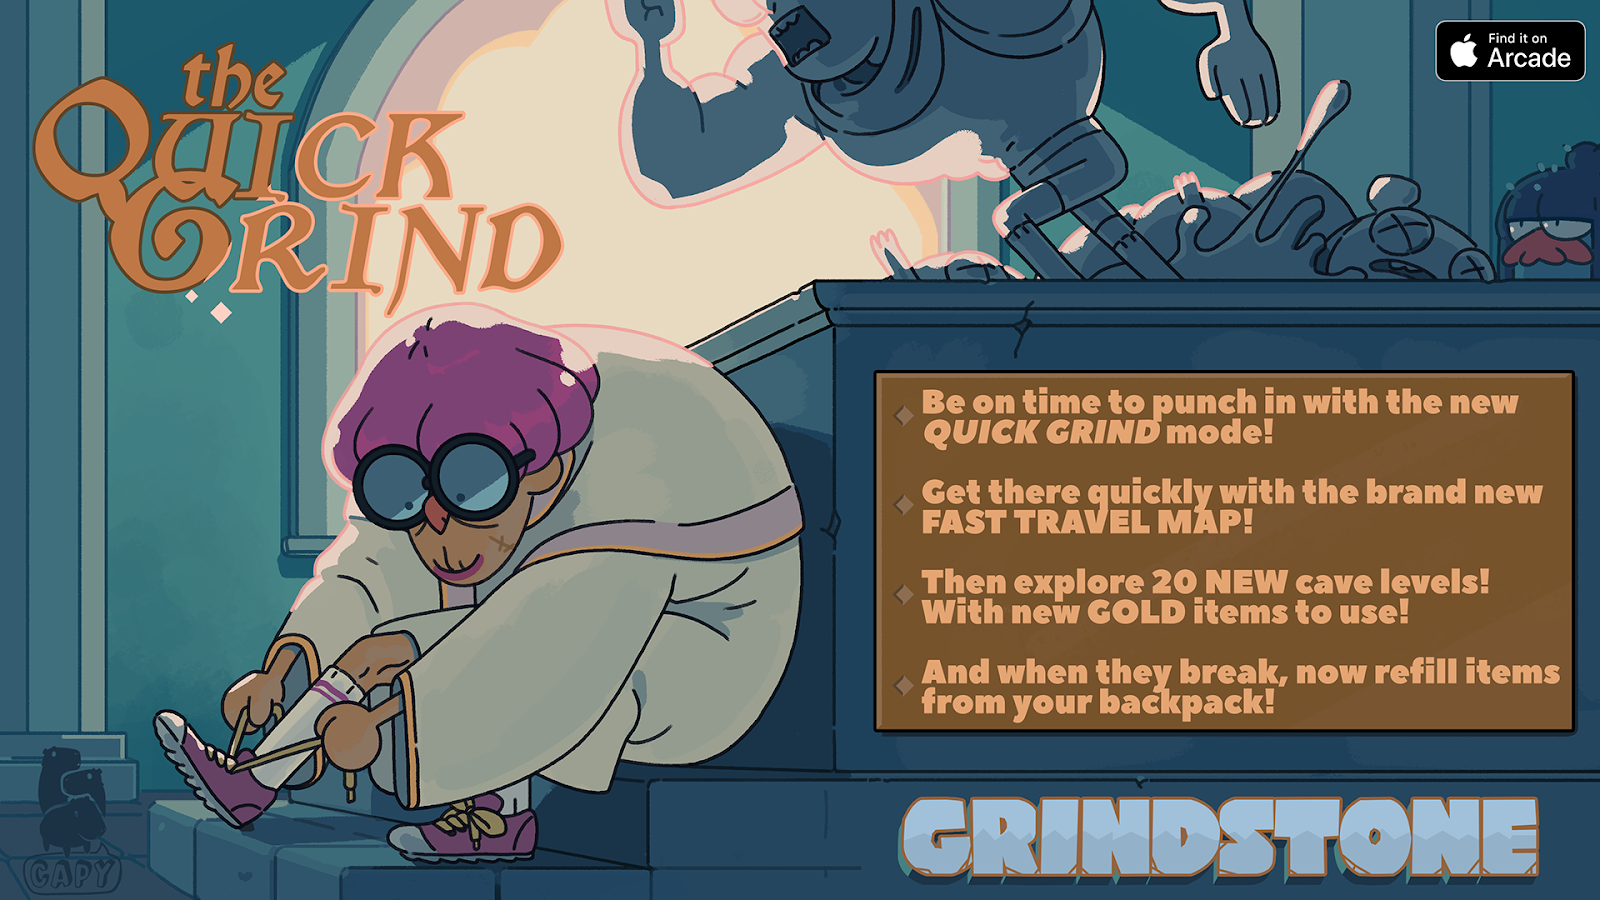 Grindstone adding new Daily Quick Grind mode and more